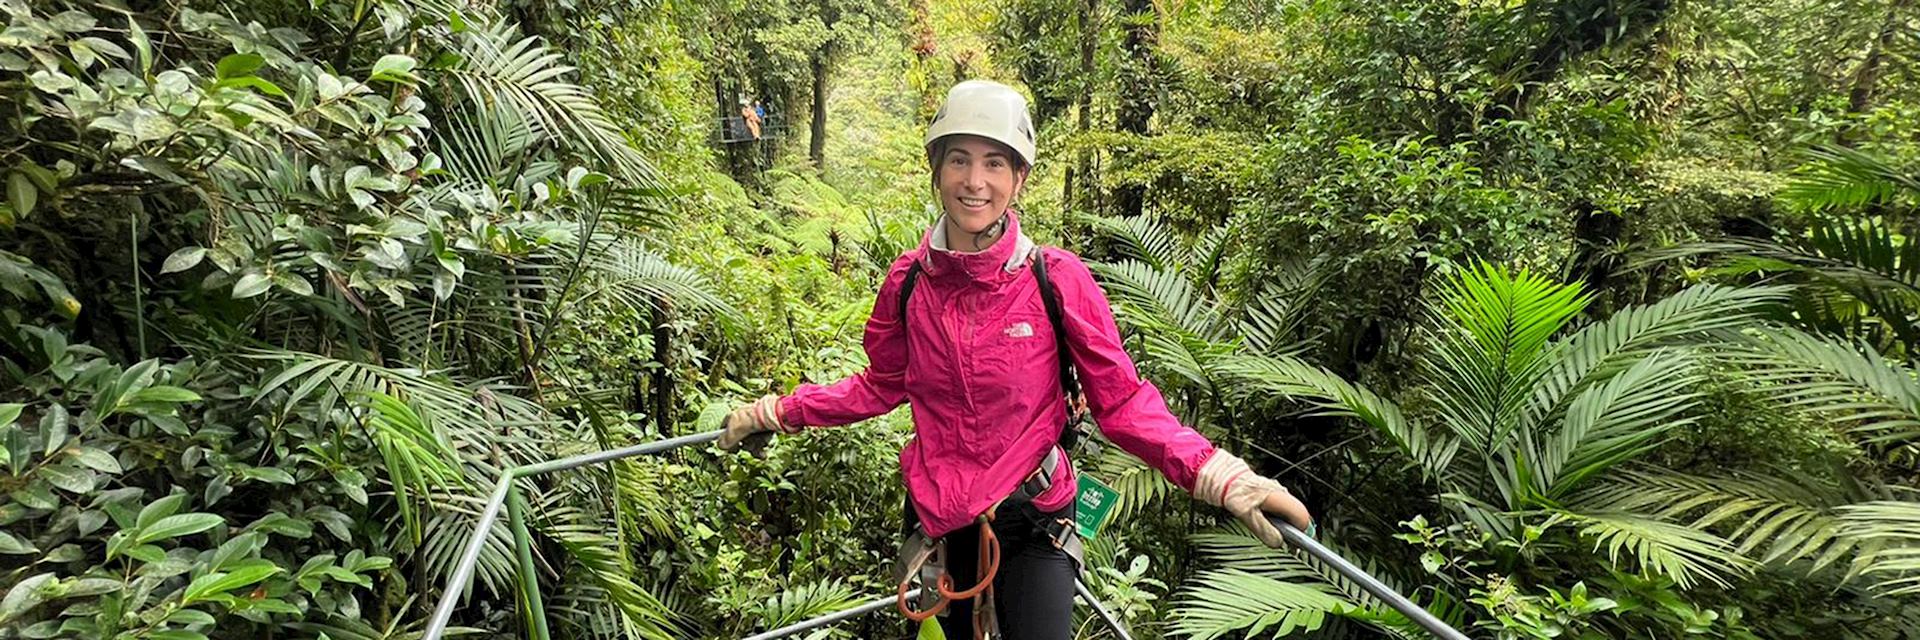 Audley Specialist Natalie at the Hanging Bridges in Arenal